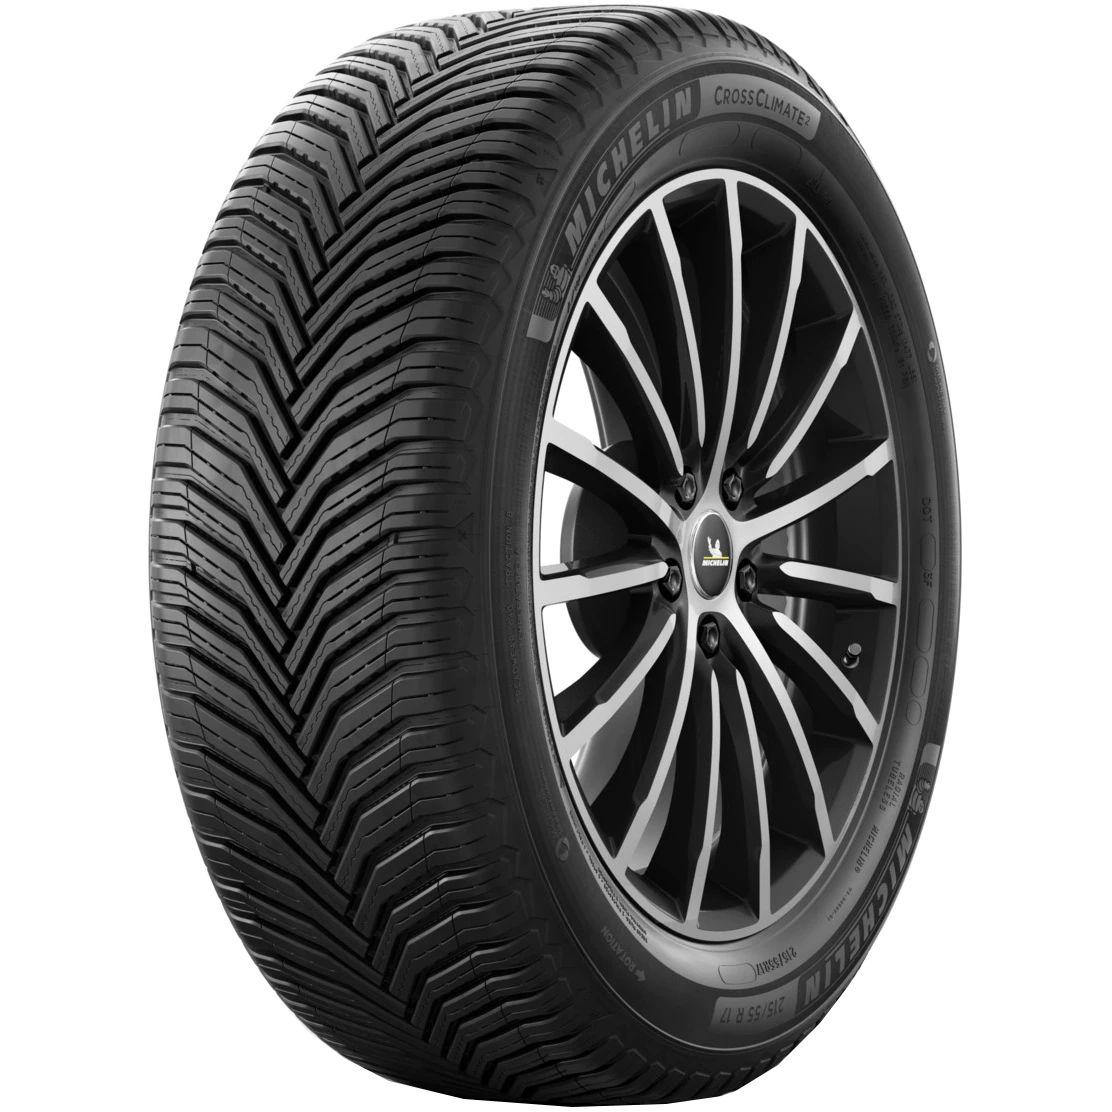 Anvelope all seasons MICHELIN CrossClimate2 M+S XL 235/60 R18 107H